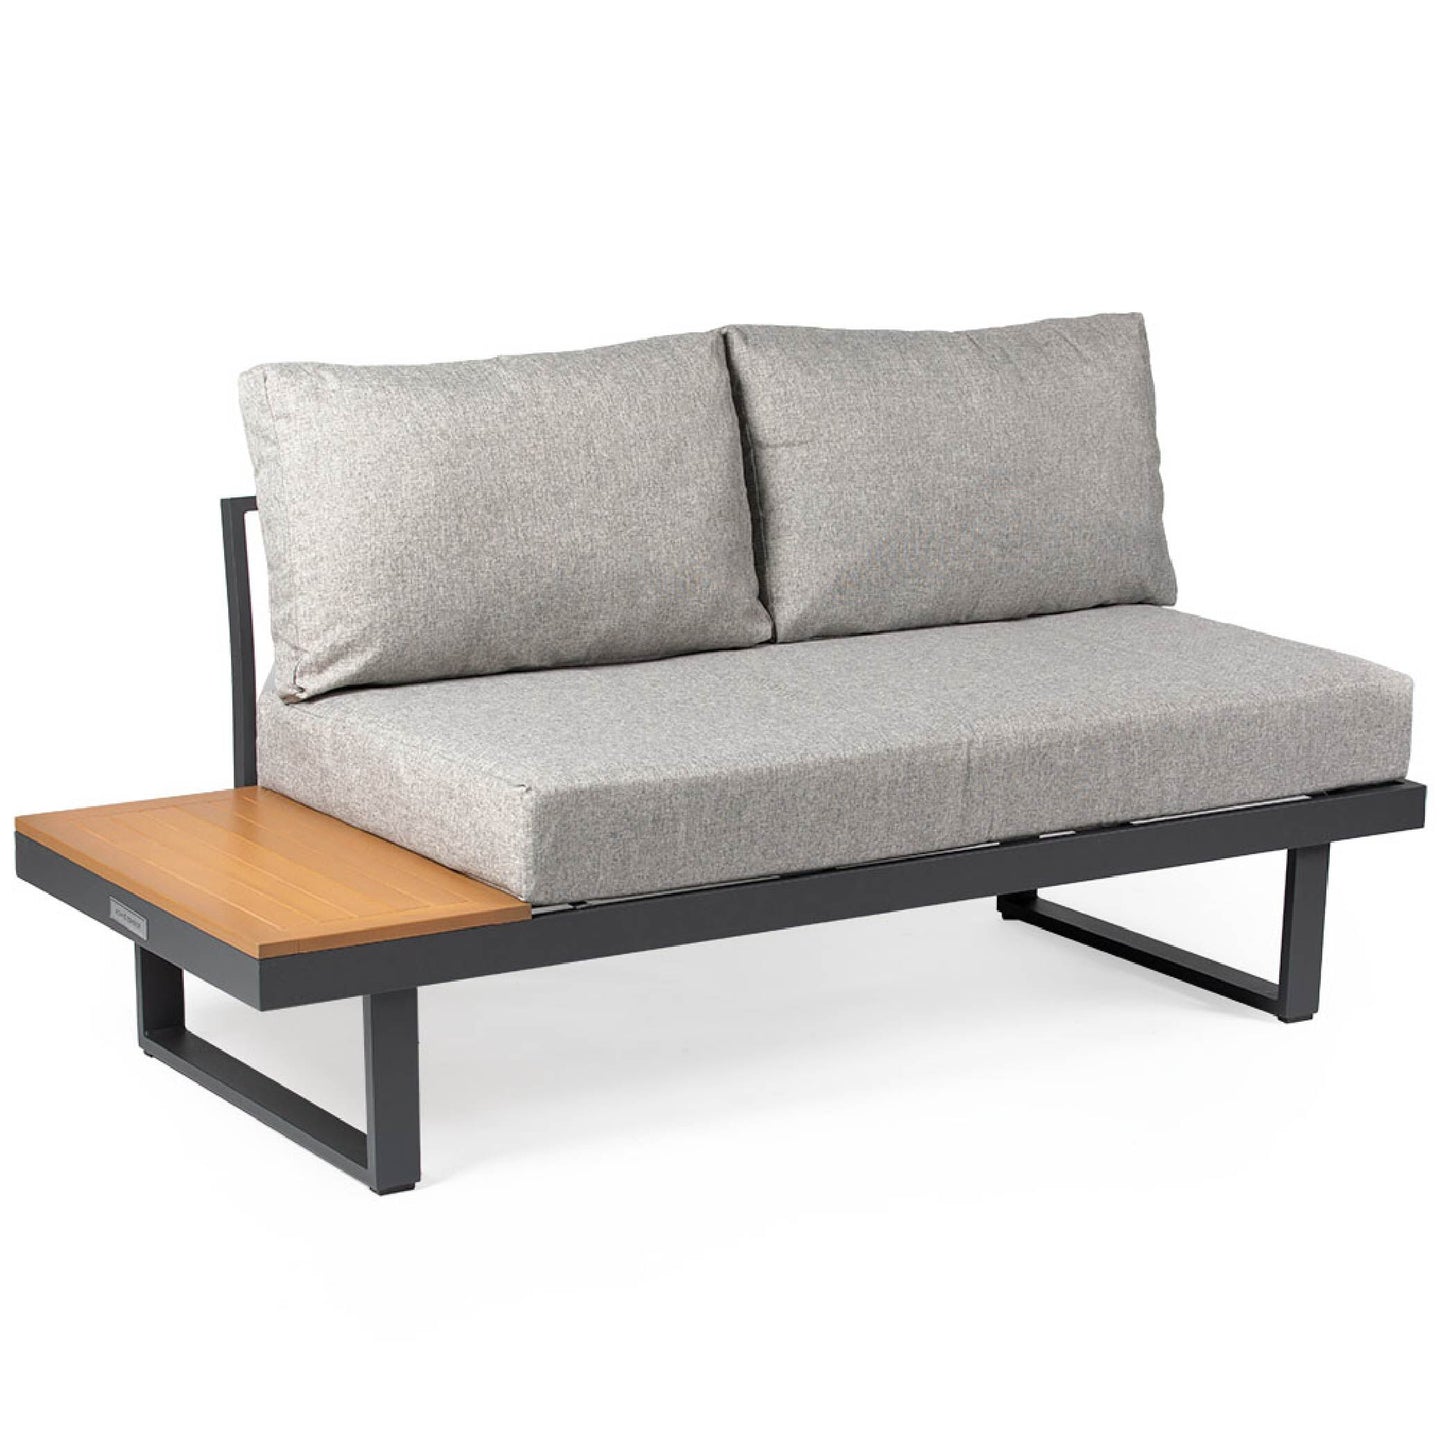 Caspian Loveseat with Cushions and Side Table - view 1